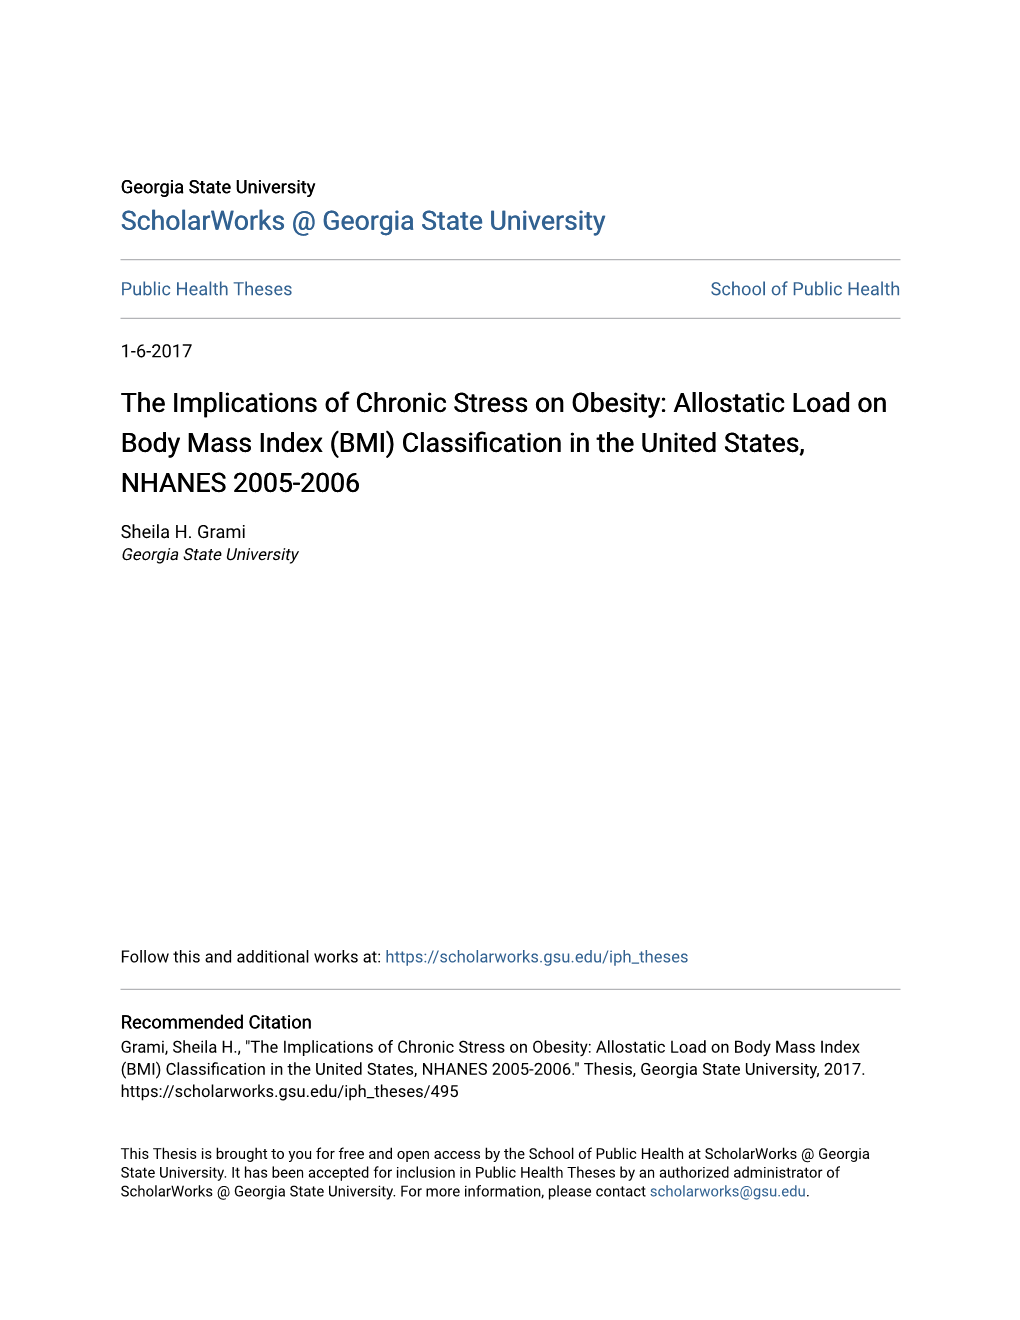 The Implications of Chronic Stress on Obesity: Allostatic Load on Body Mass Index (BMI) Classification in the United States, NHANES 2005-2006